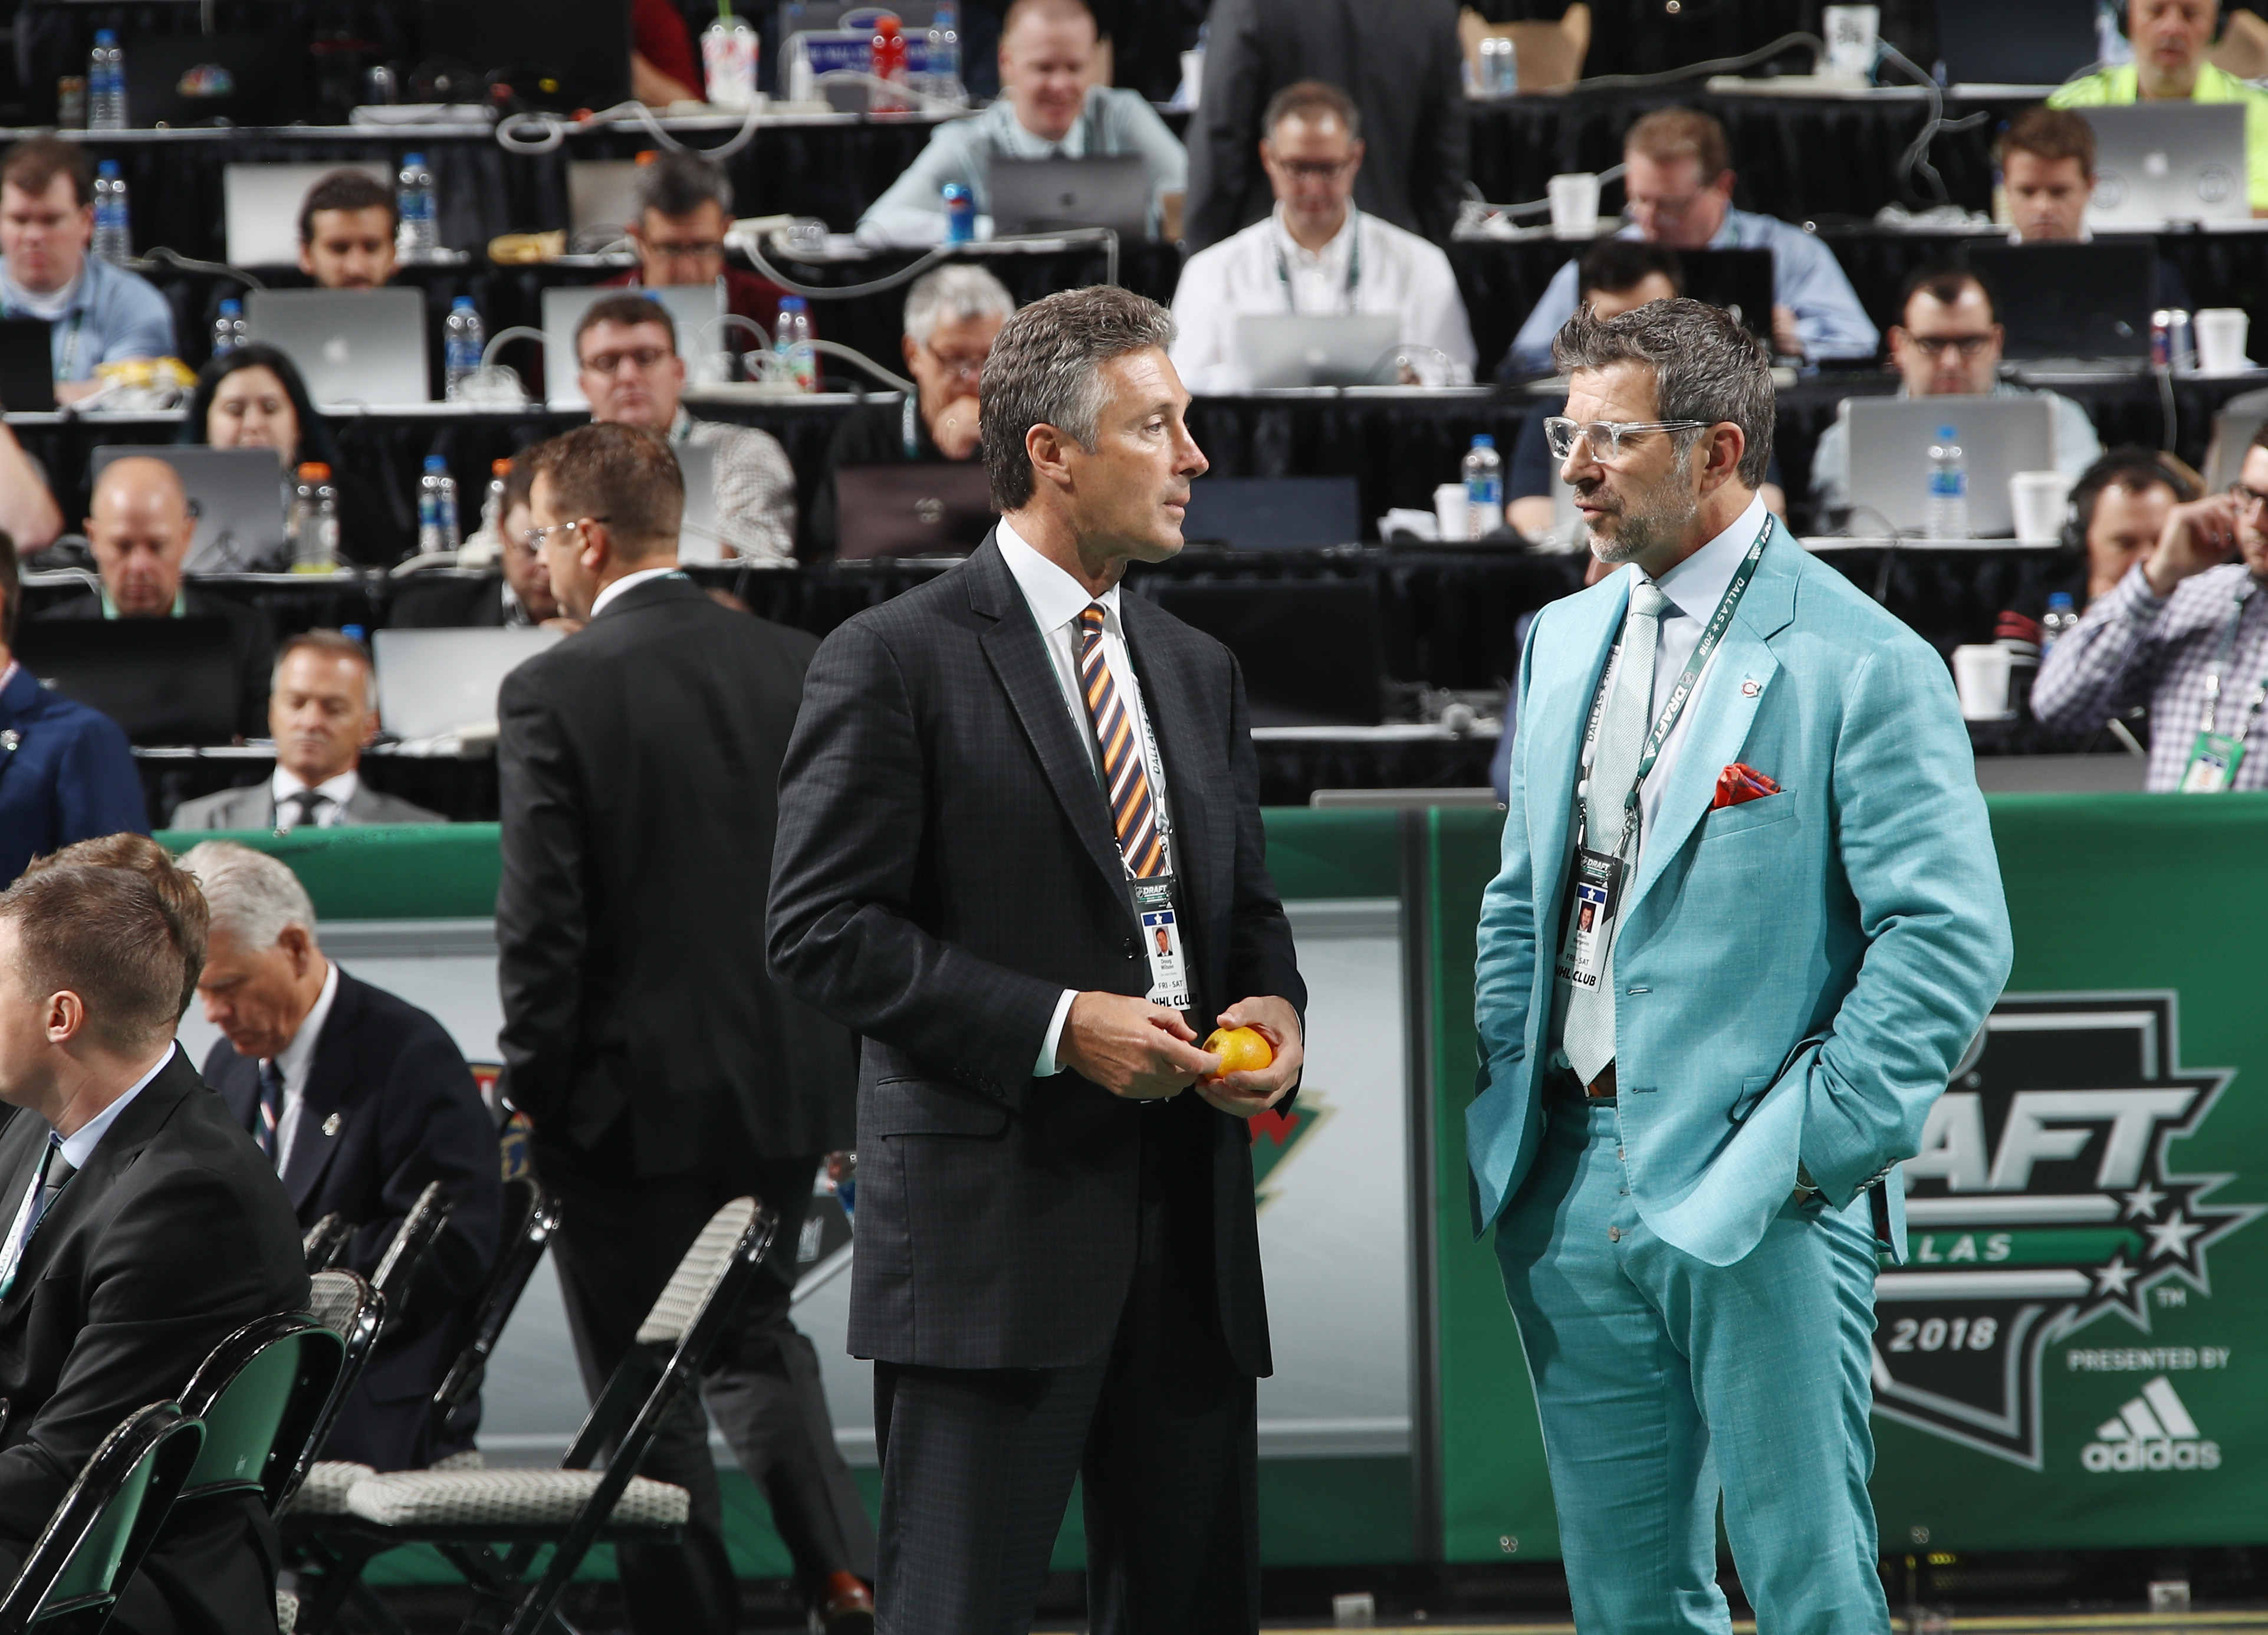 DALLAS, TX - JUNE 23: (l-r) Doug Wilson and Marc Bergevin attend the 2018 NHL Draft at American Airlines Center on June 23, 2018 in Dallas, Texas.